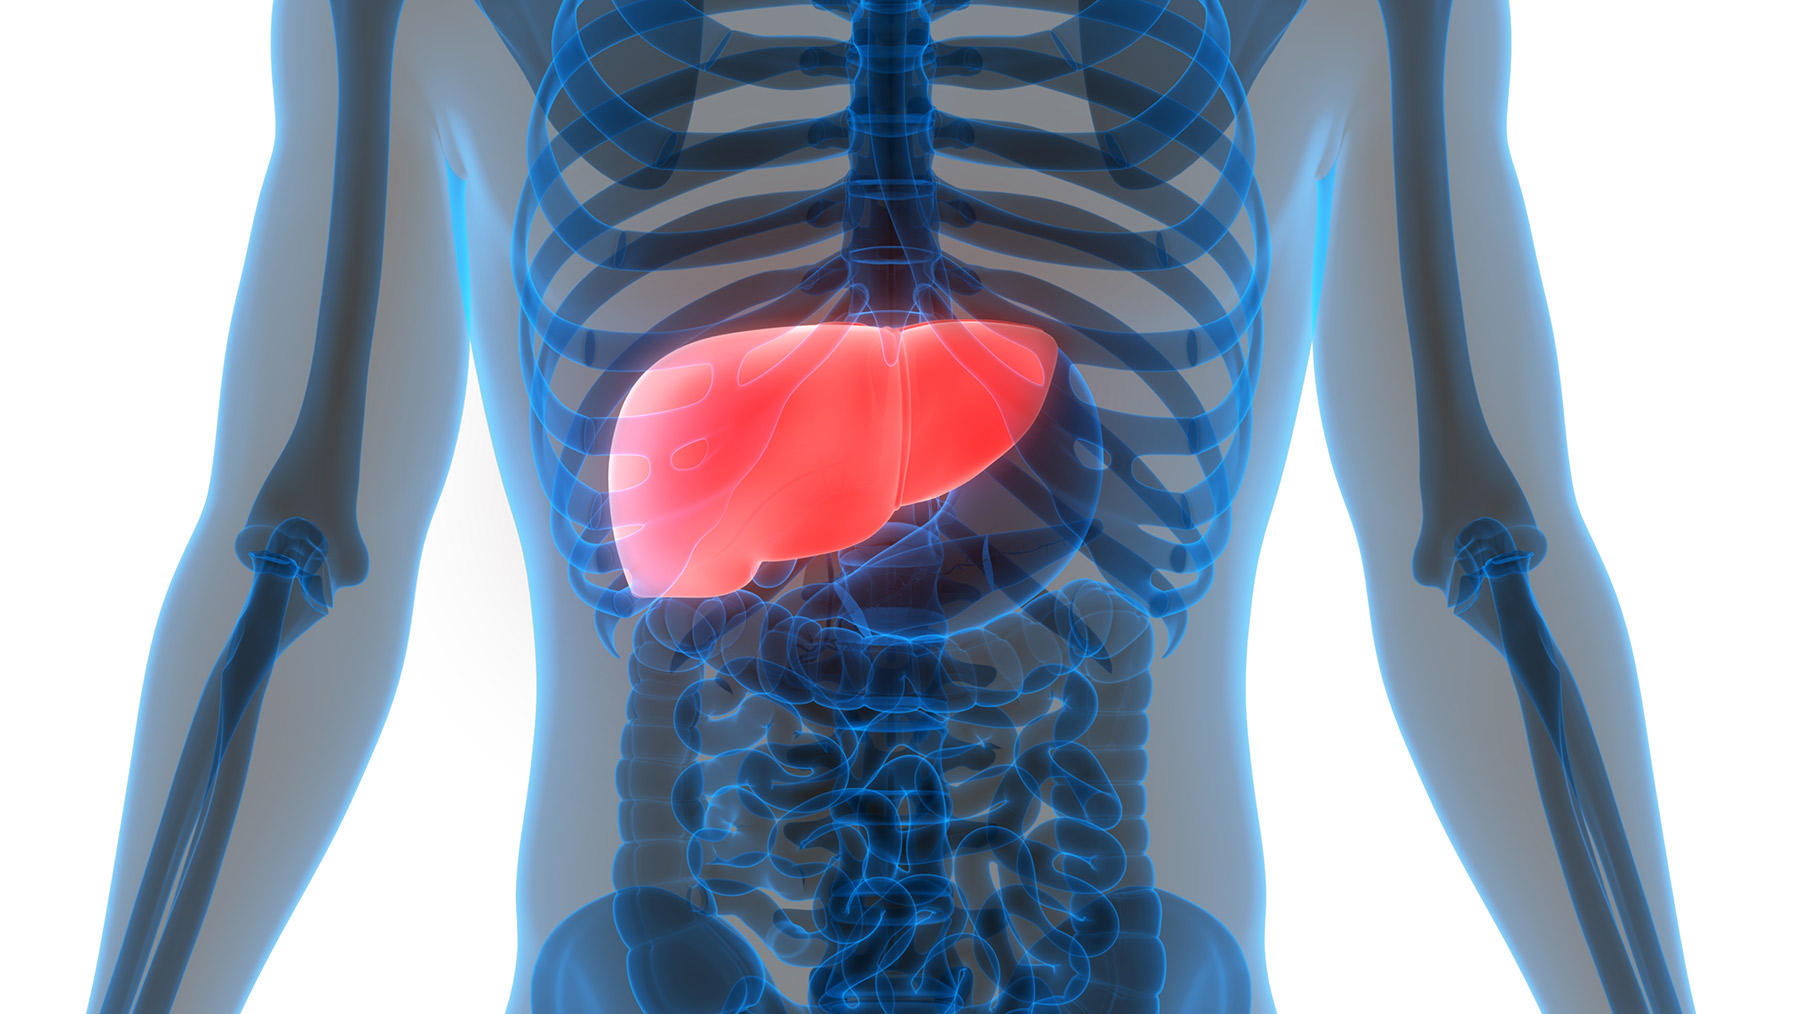 Liver Cancer Treatment in Iran